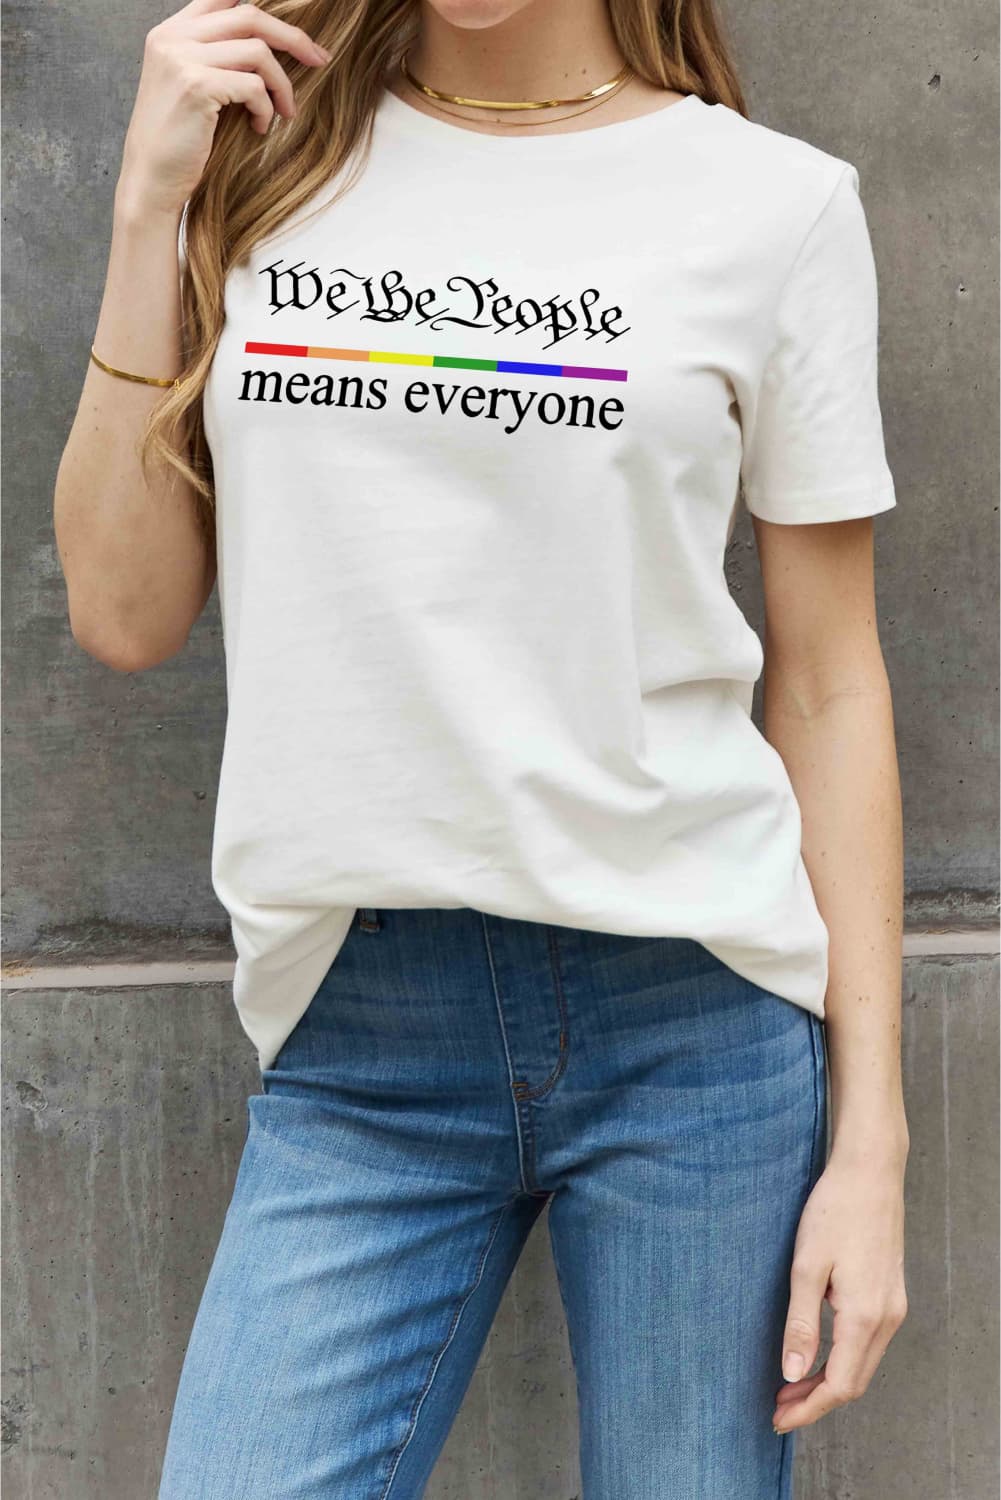 LGBT_Pride-Simply Love Full Size MEANS EVERYONE Graphic Cotton Tee - Rose Gold Co. Shop